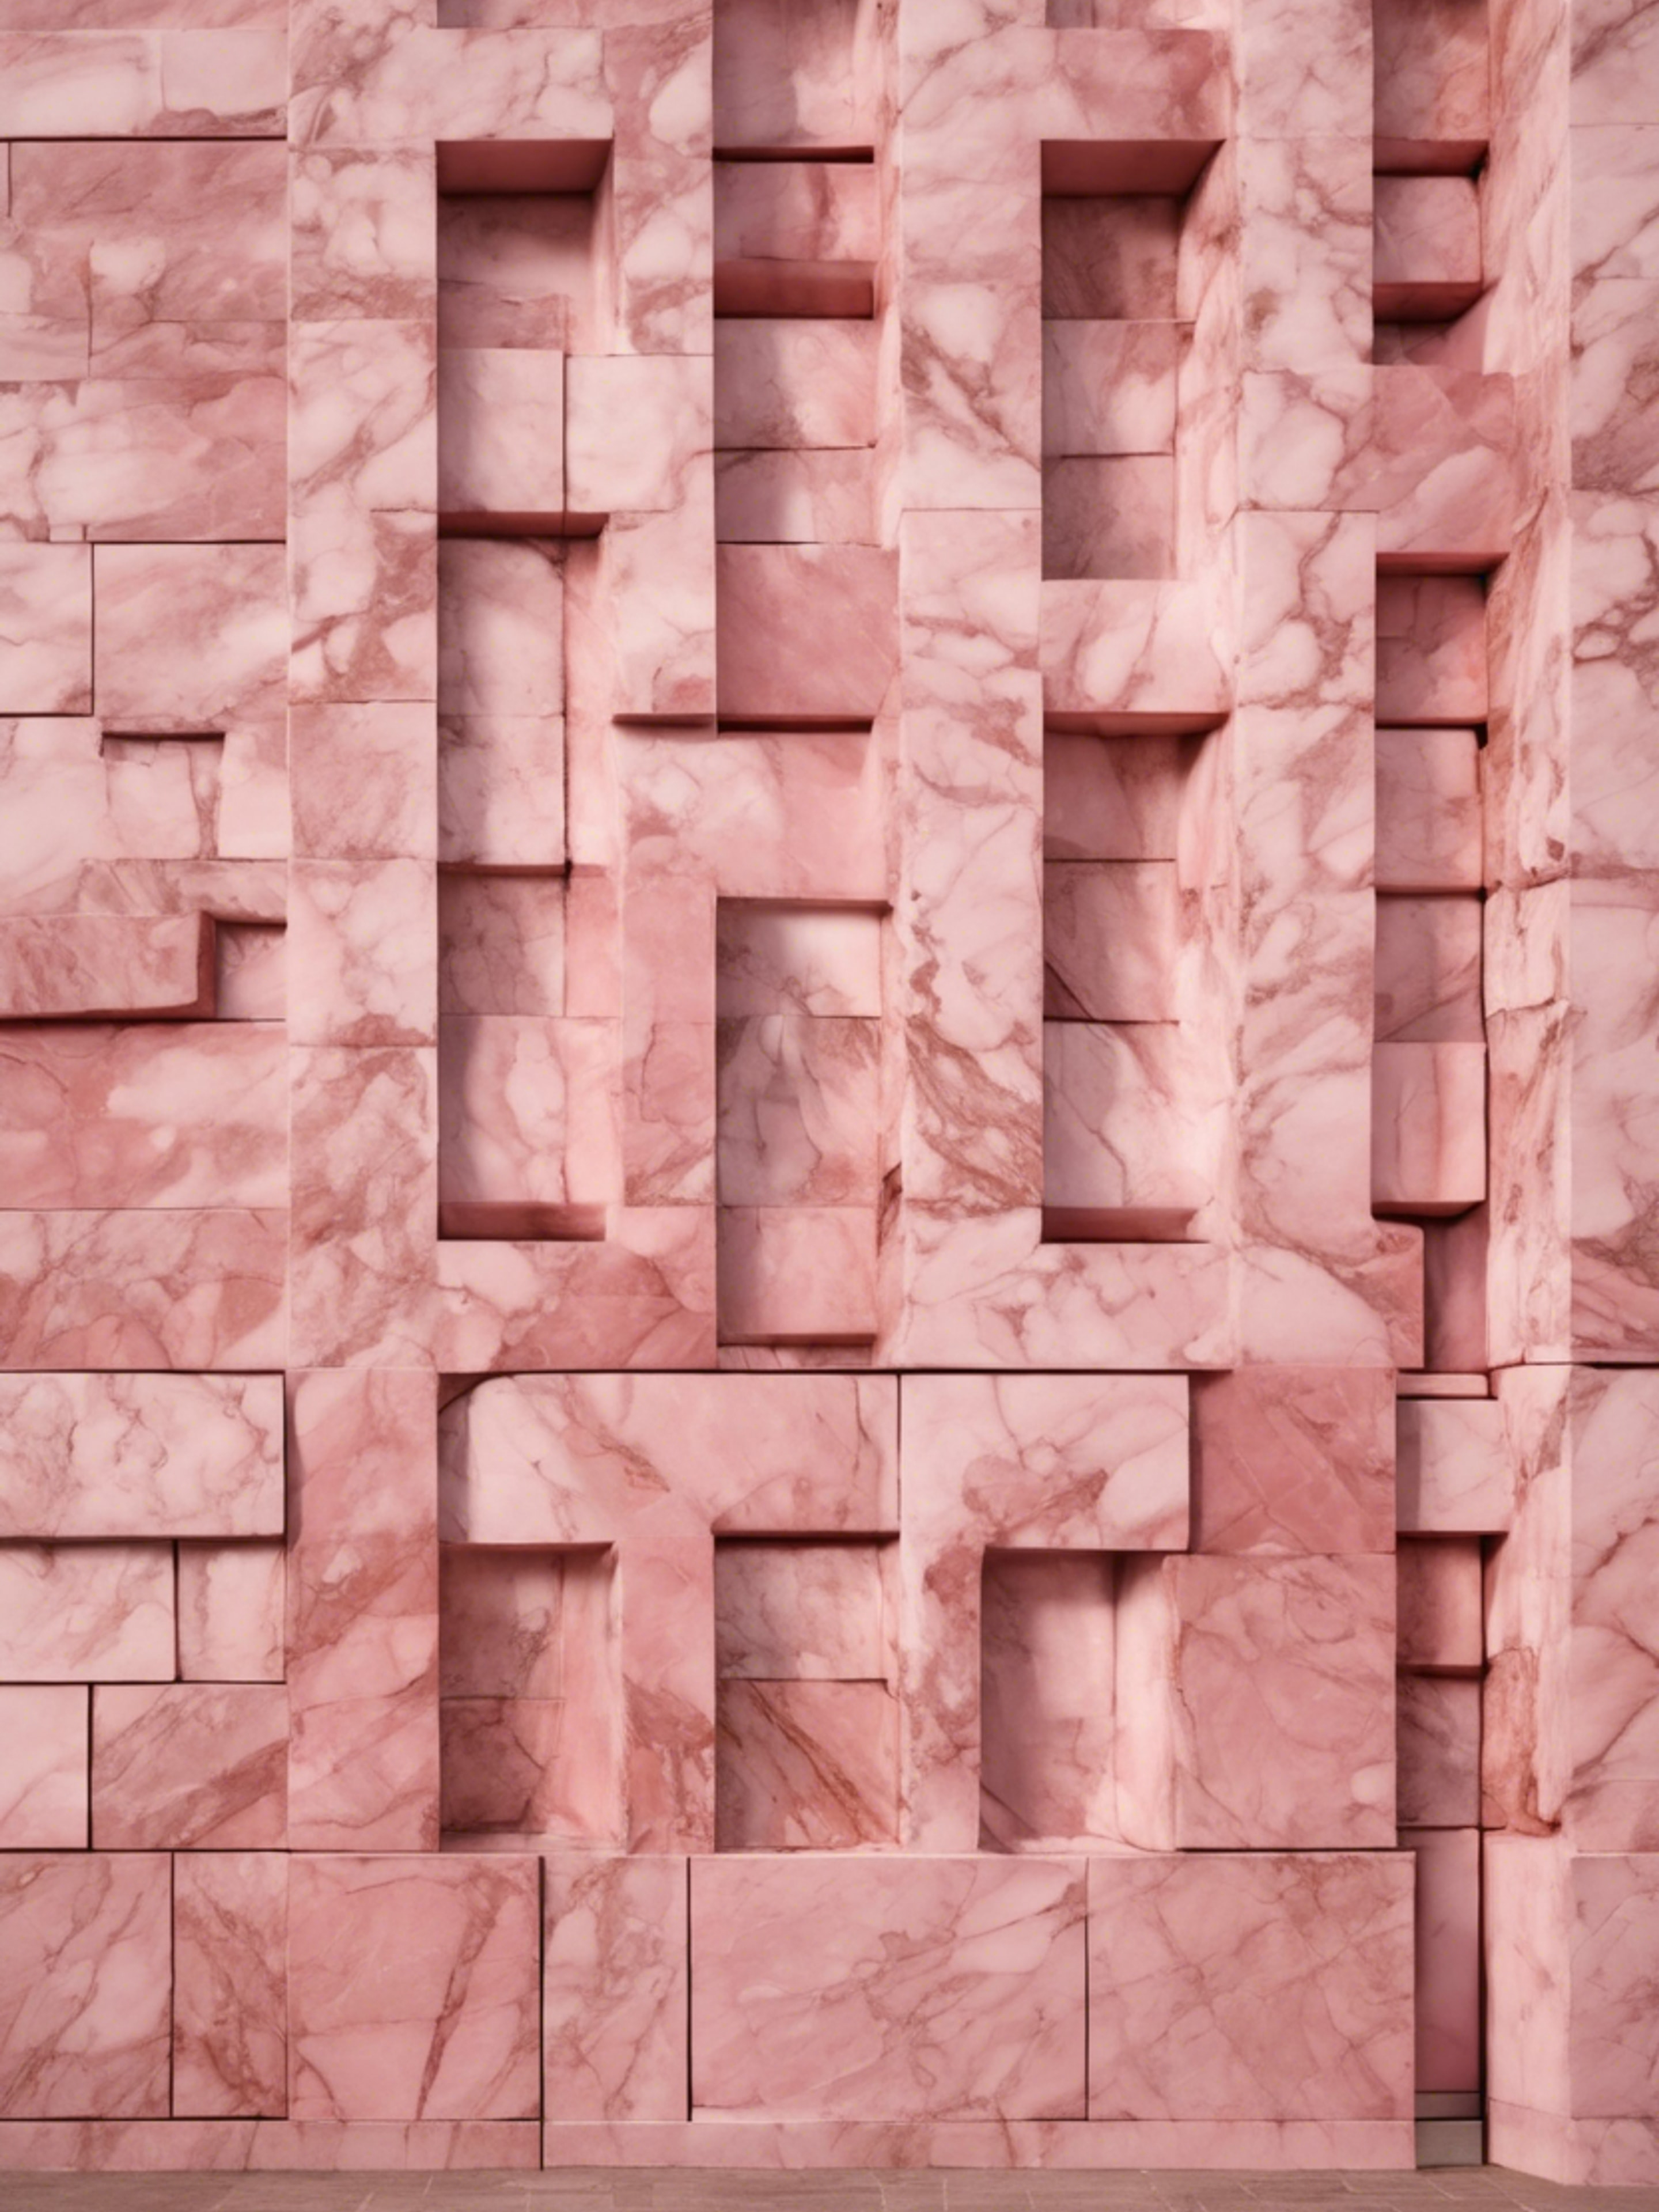 An outdoor wall of a building, made of polished pink marble. טפט[24255f95efd34f59a019]